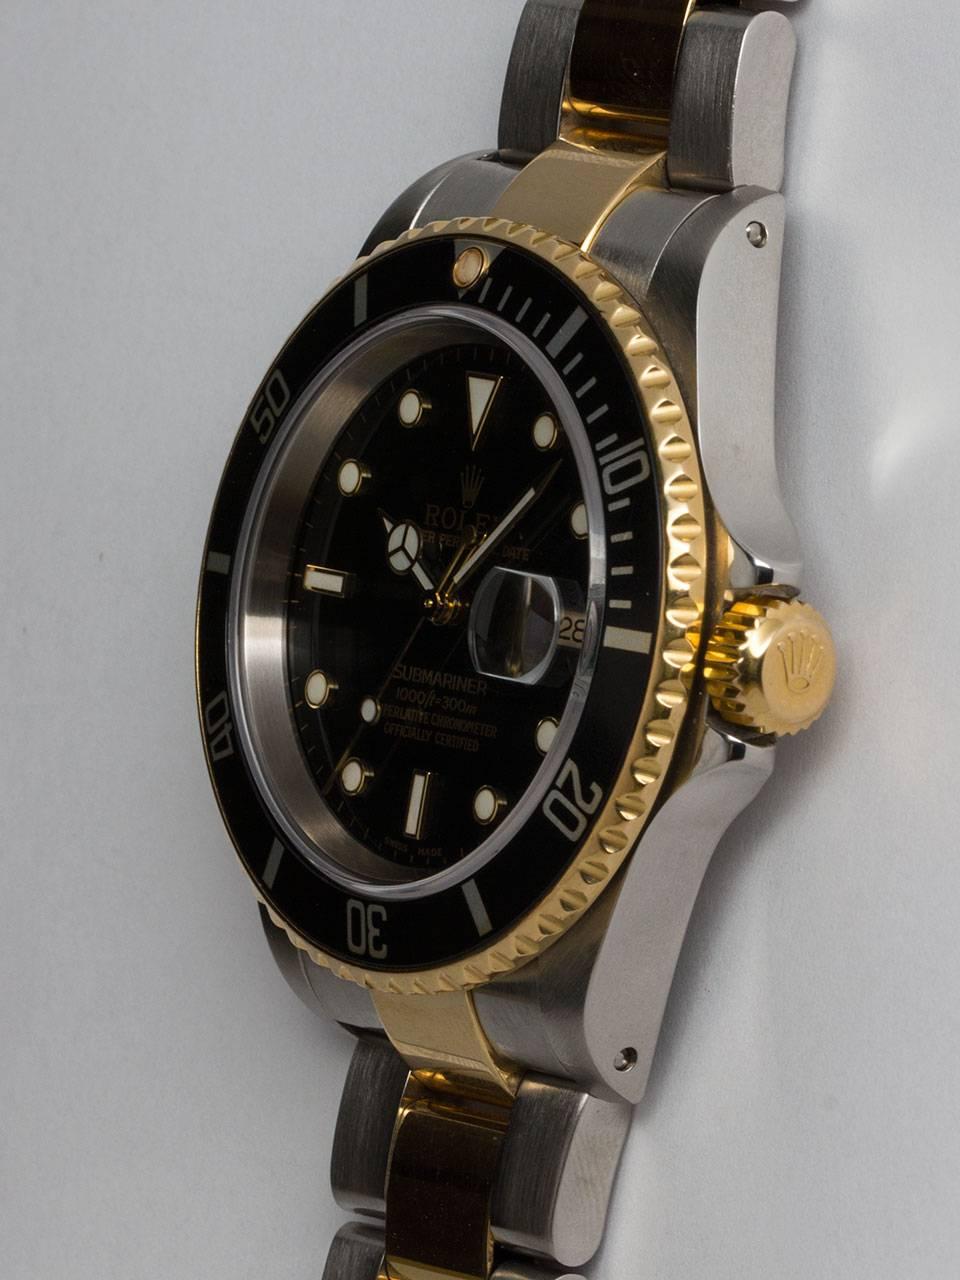 Rolex Submariner stainless steel and 18K gold ref#16613 case serial# D6 circa 2005. Recent, now discontinued model with no holes case, unidirectional elapsed time bezel, sapphire crystal, glossy black original luminova dial with gold luminous